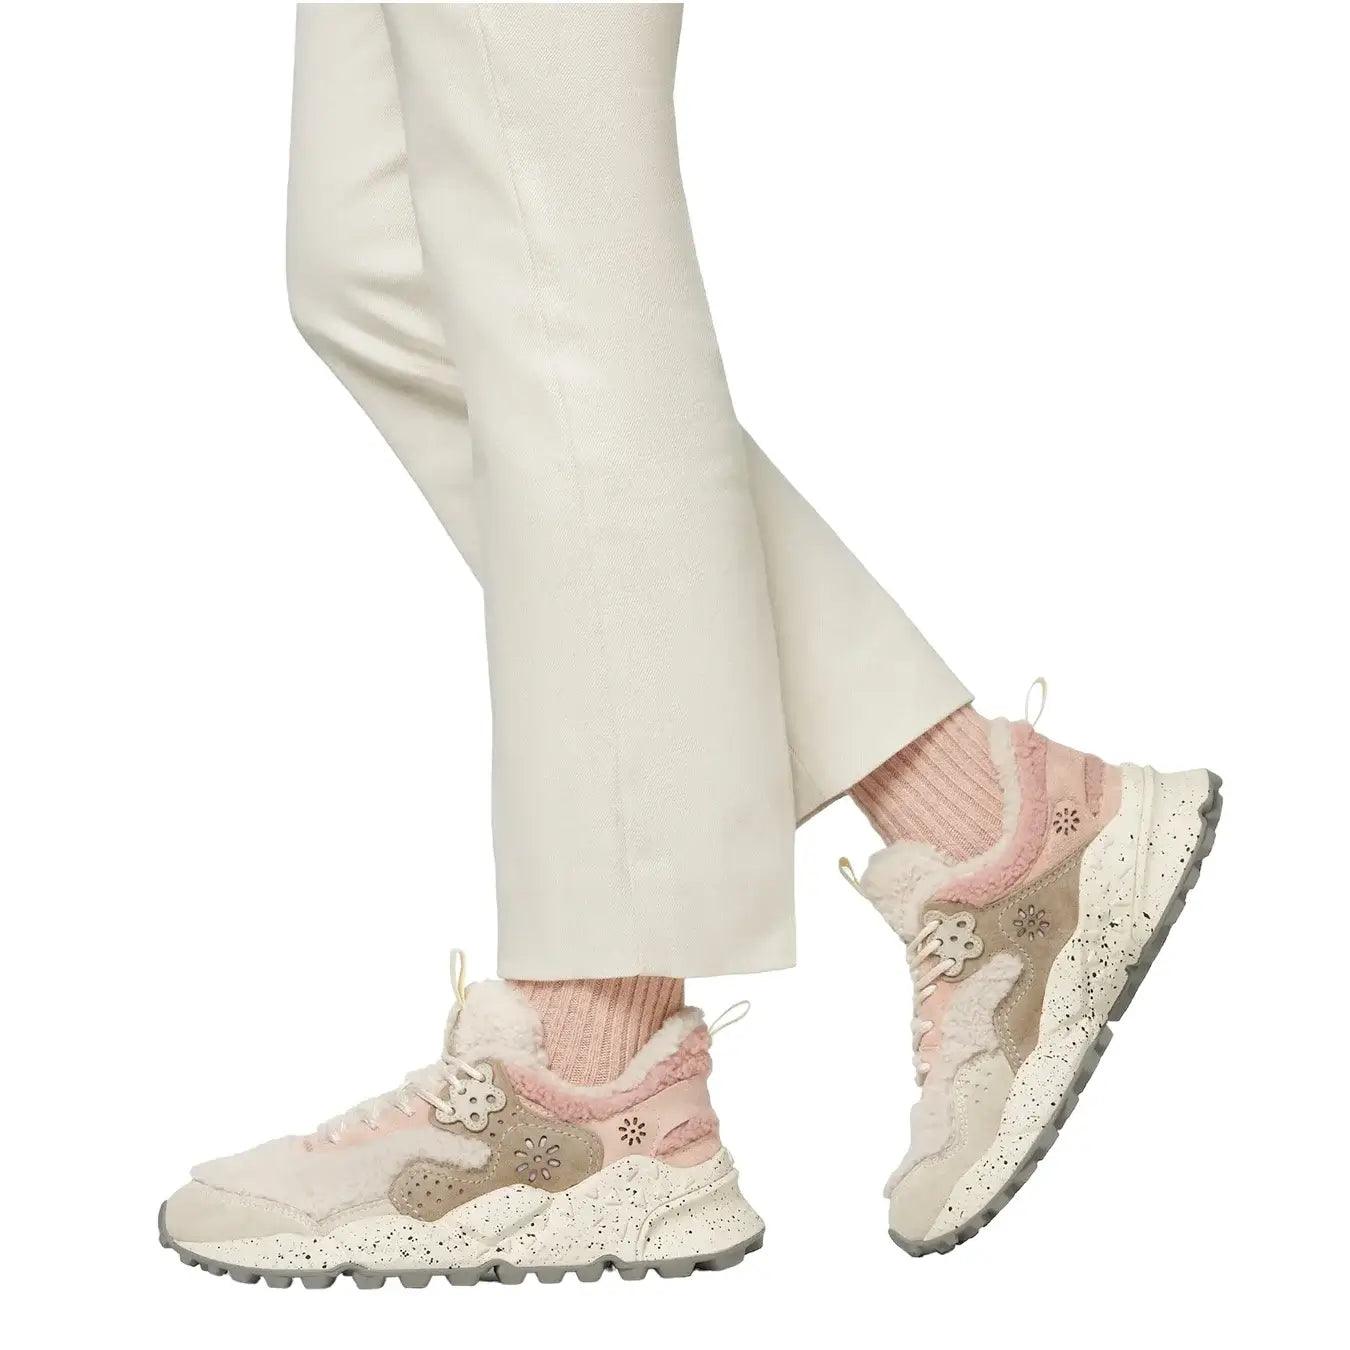 Flower m. Sneakers, 1n04, Kotetsu Suede Teddy, White Pink, Bassiniboutique.it, 2023 a/i